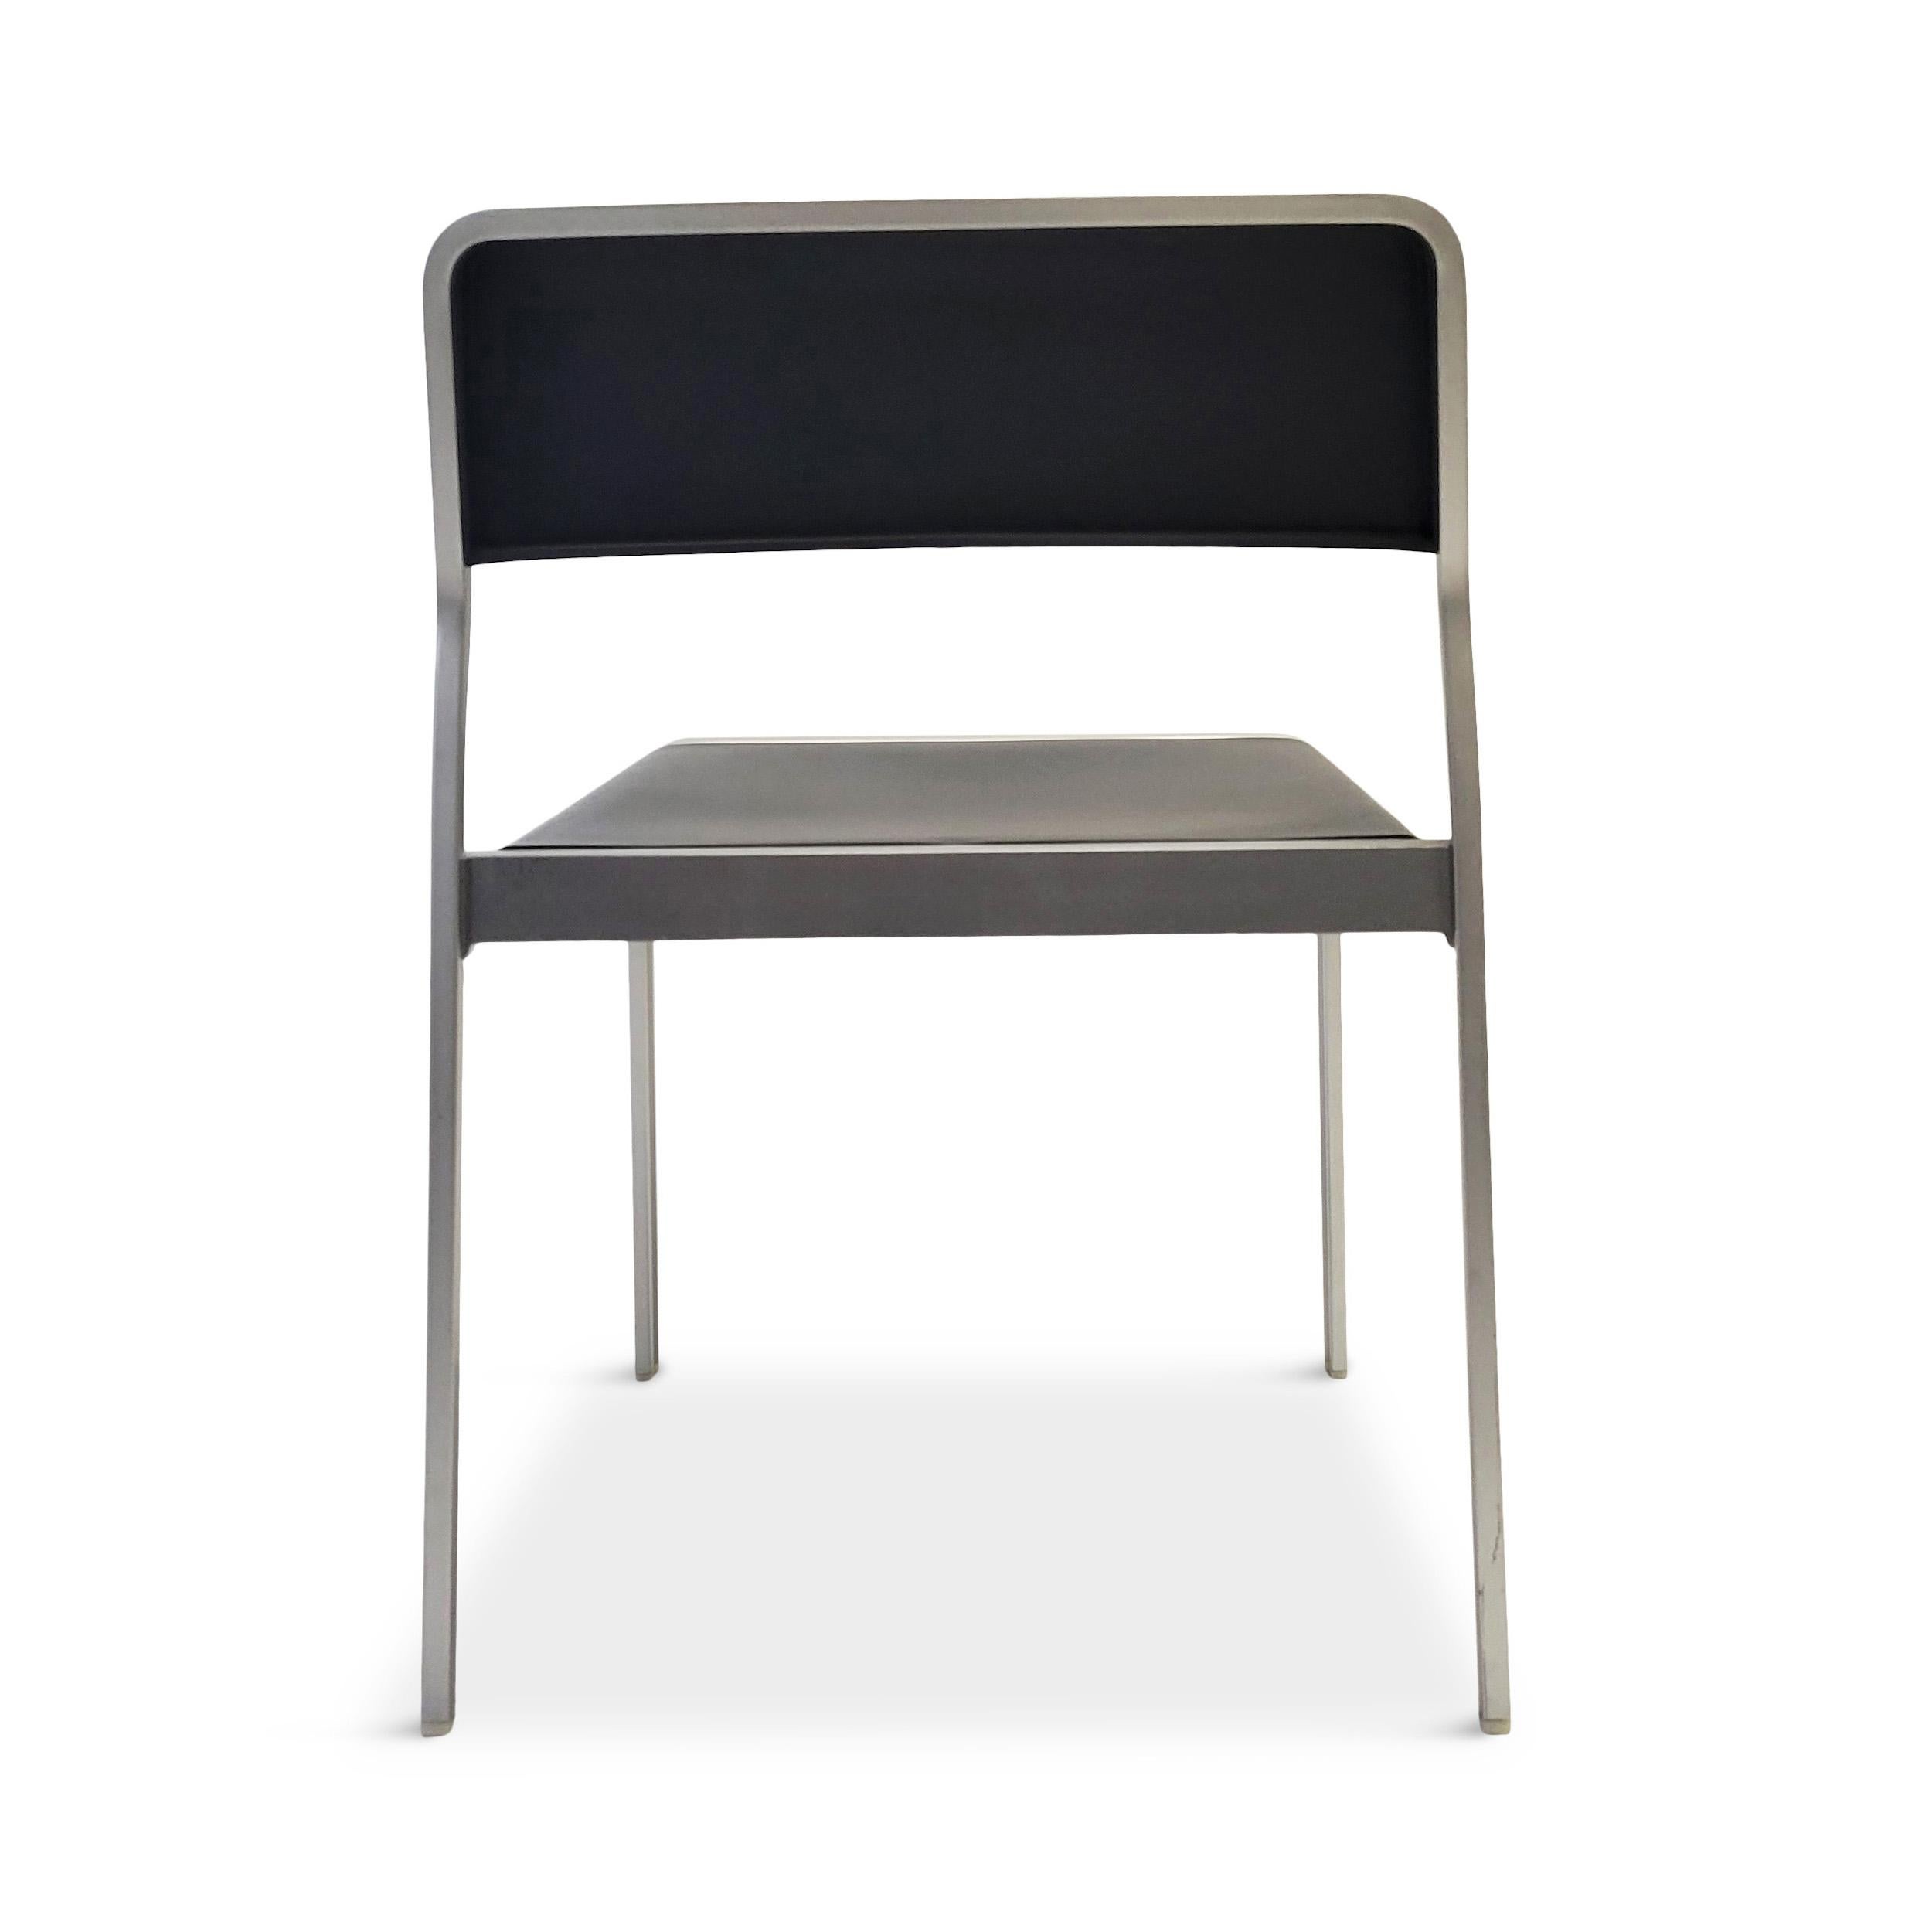 Designed in 2001 and produced by Pallucco in 2002, the Bridge is a Carlo Tamborini-designed stackable chair with a metal frame and plastic seat and back. The Bridge chair is very similar to Tamborini's later collaboration with Piero Lissoni that